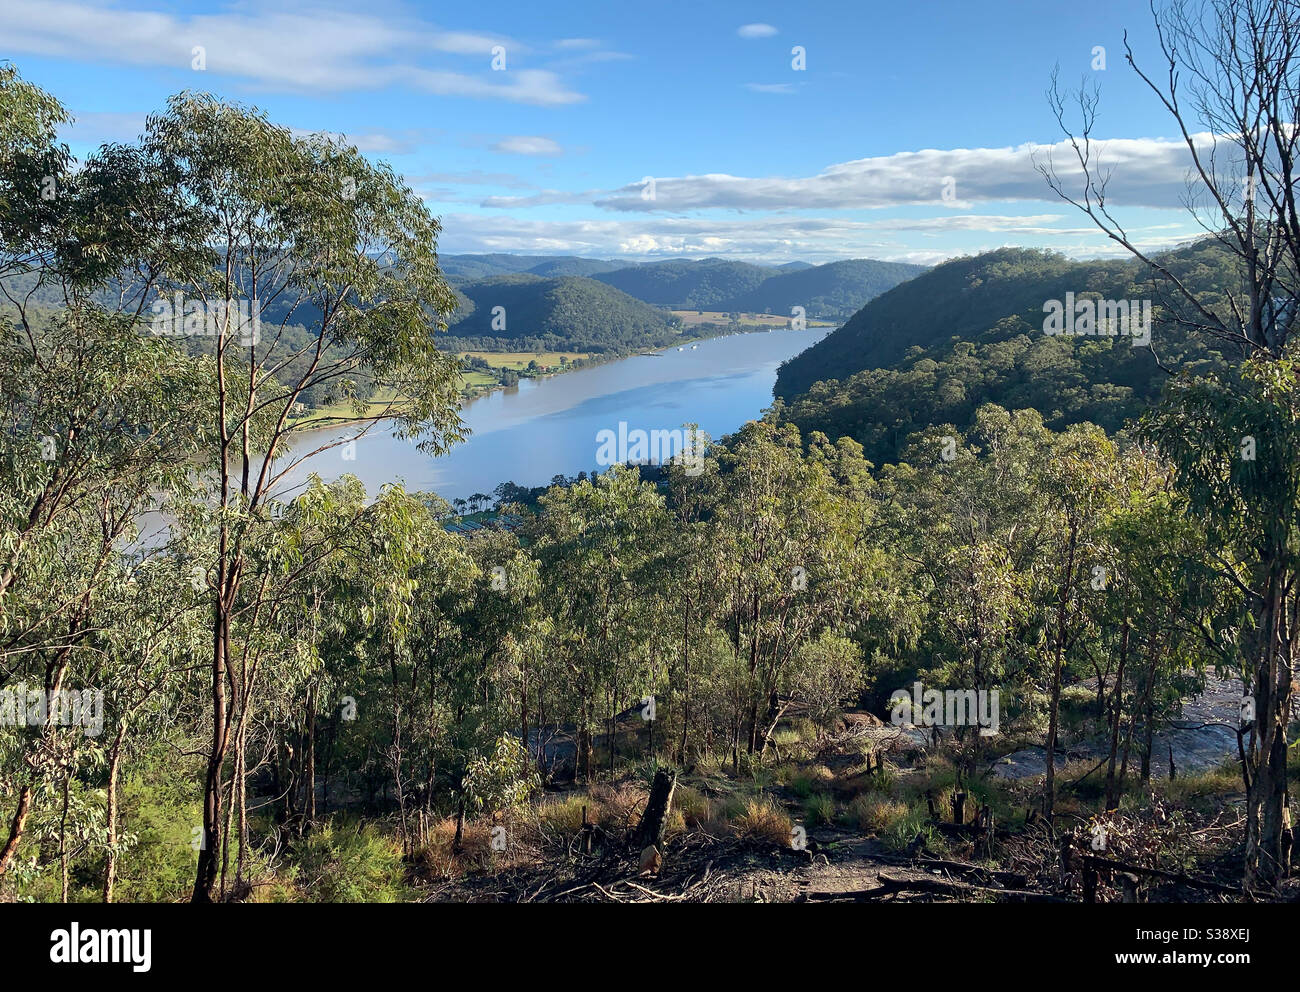 iPhone photograph of the Hawkesbury River near Wisemans Ferry in New South Wales in regional Australia Stock Photo